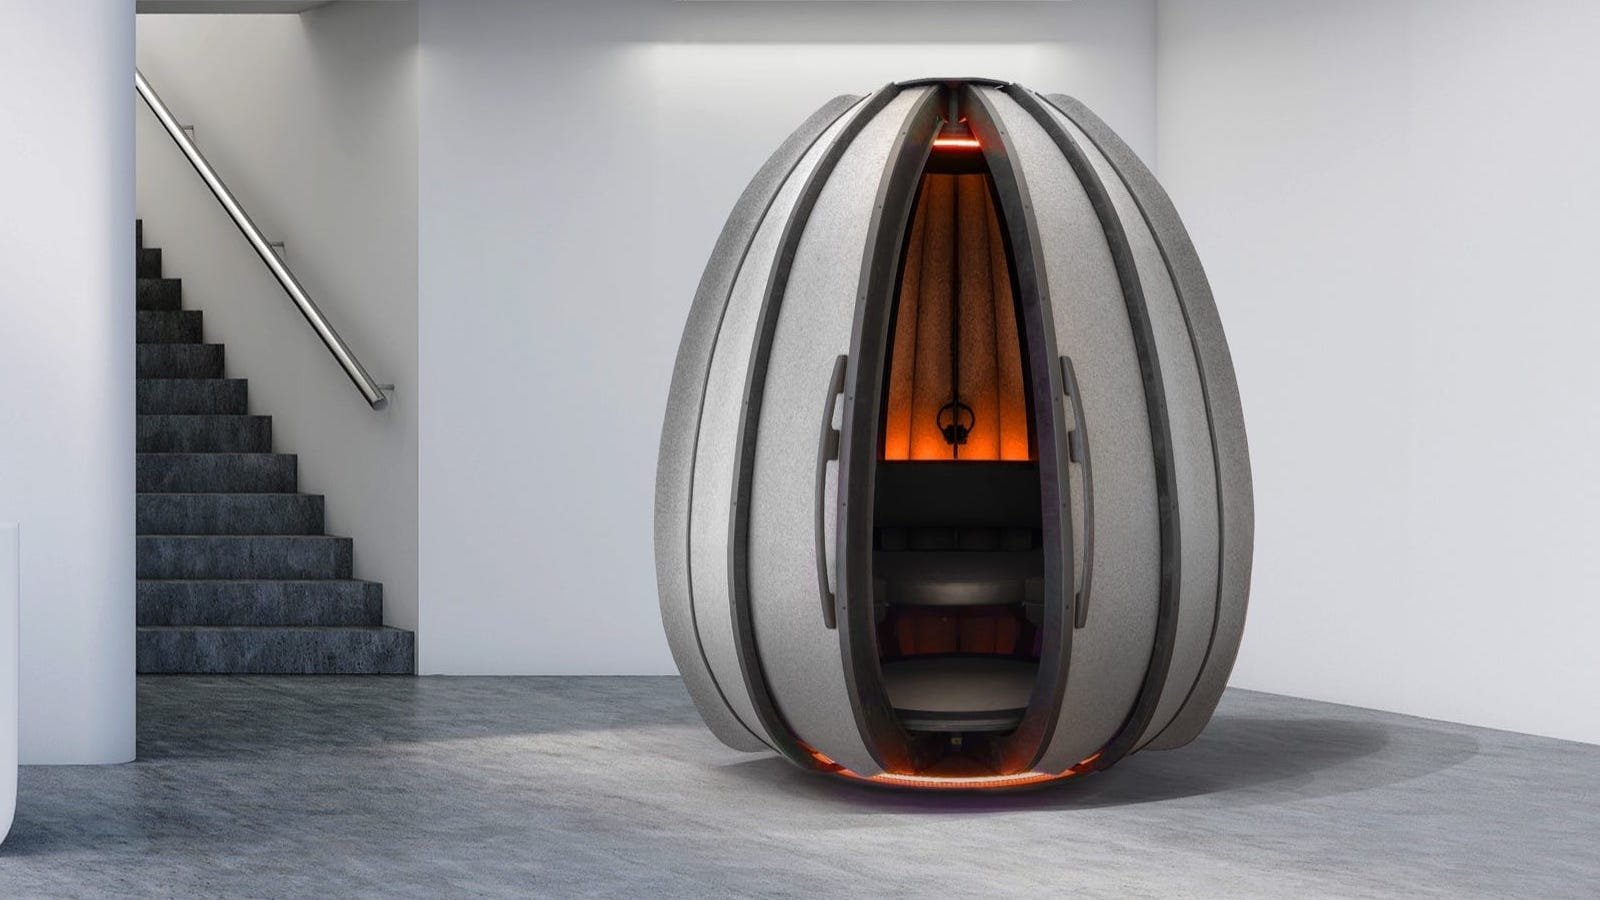 OpenSeed Meditation Pod creative escape gives you a calm space at work